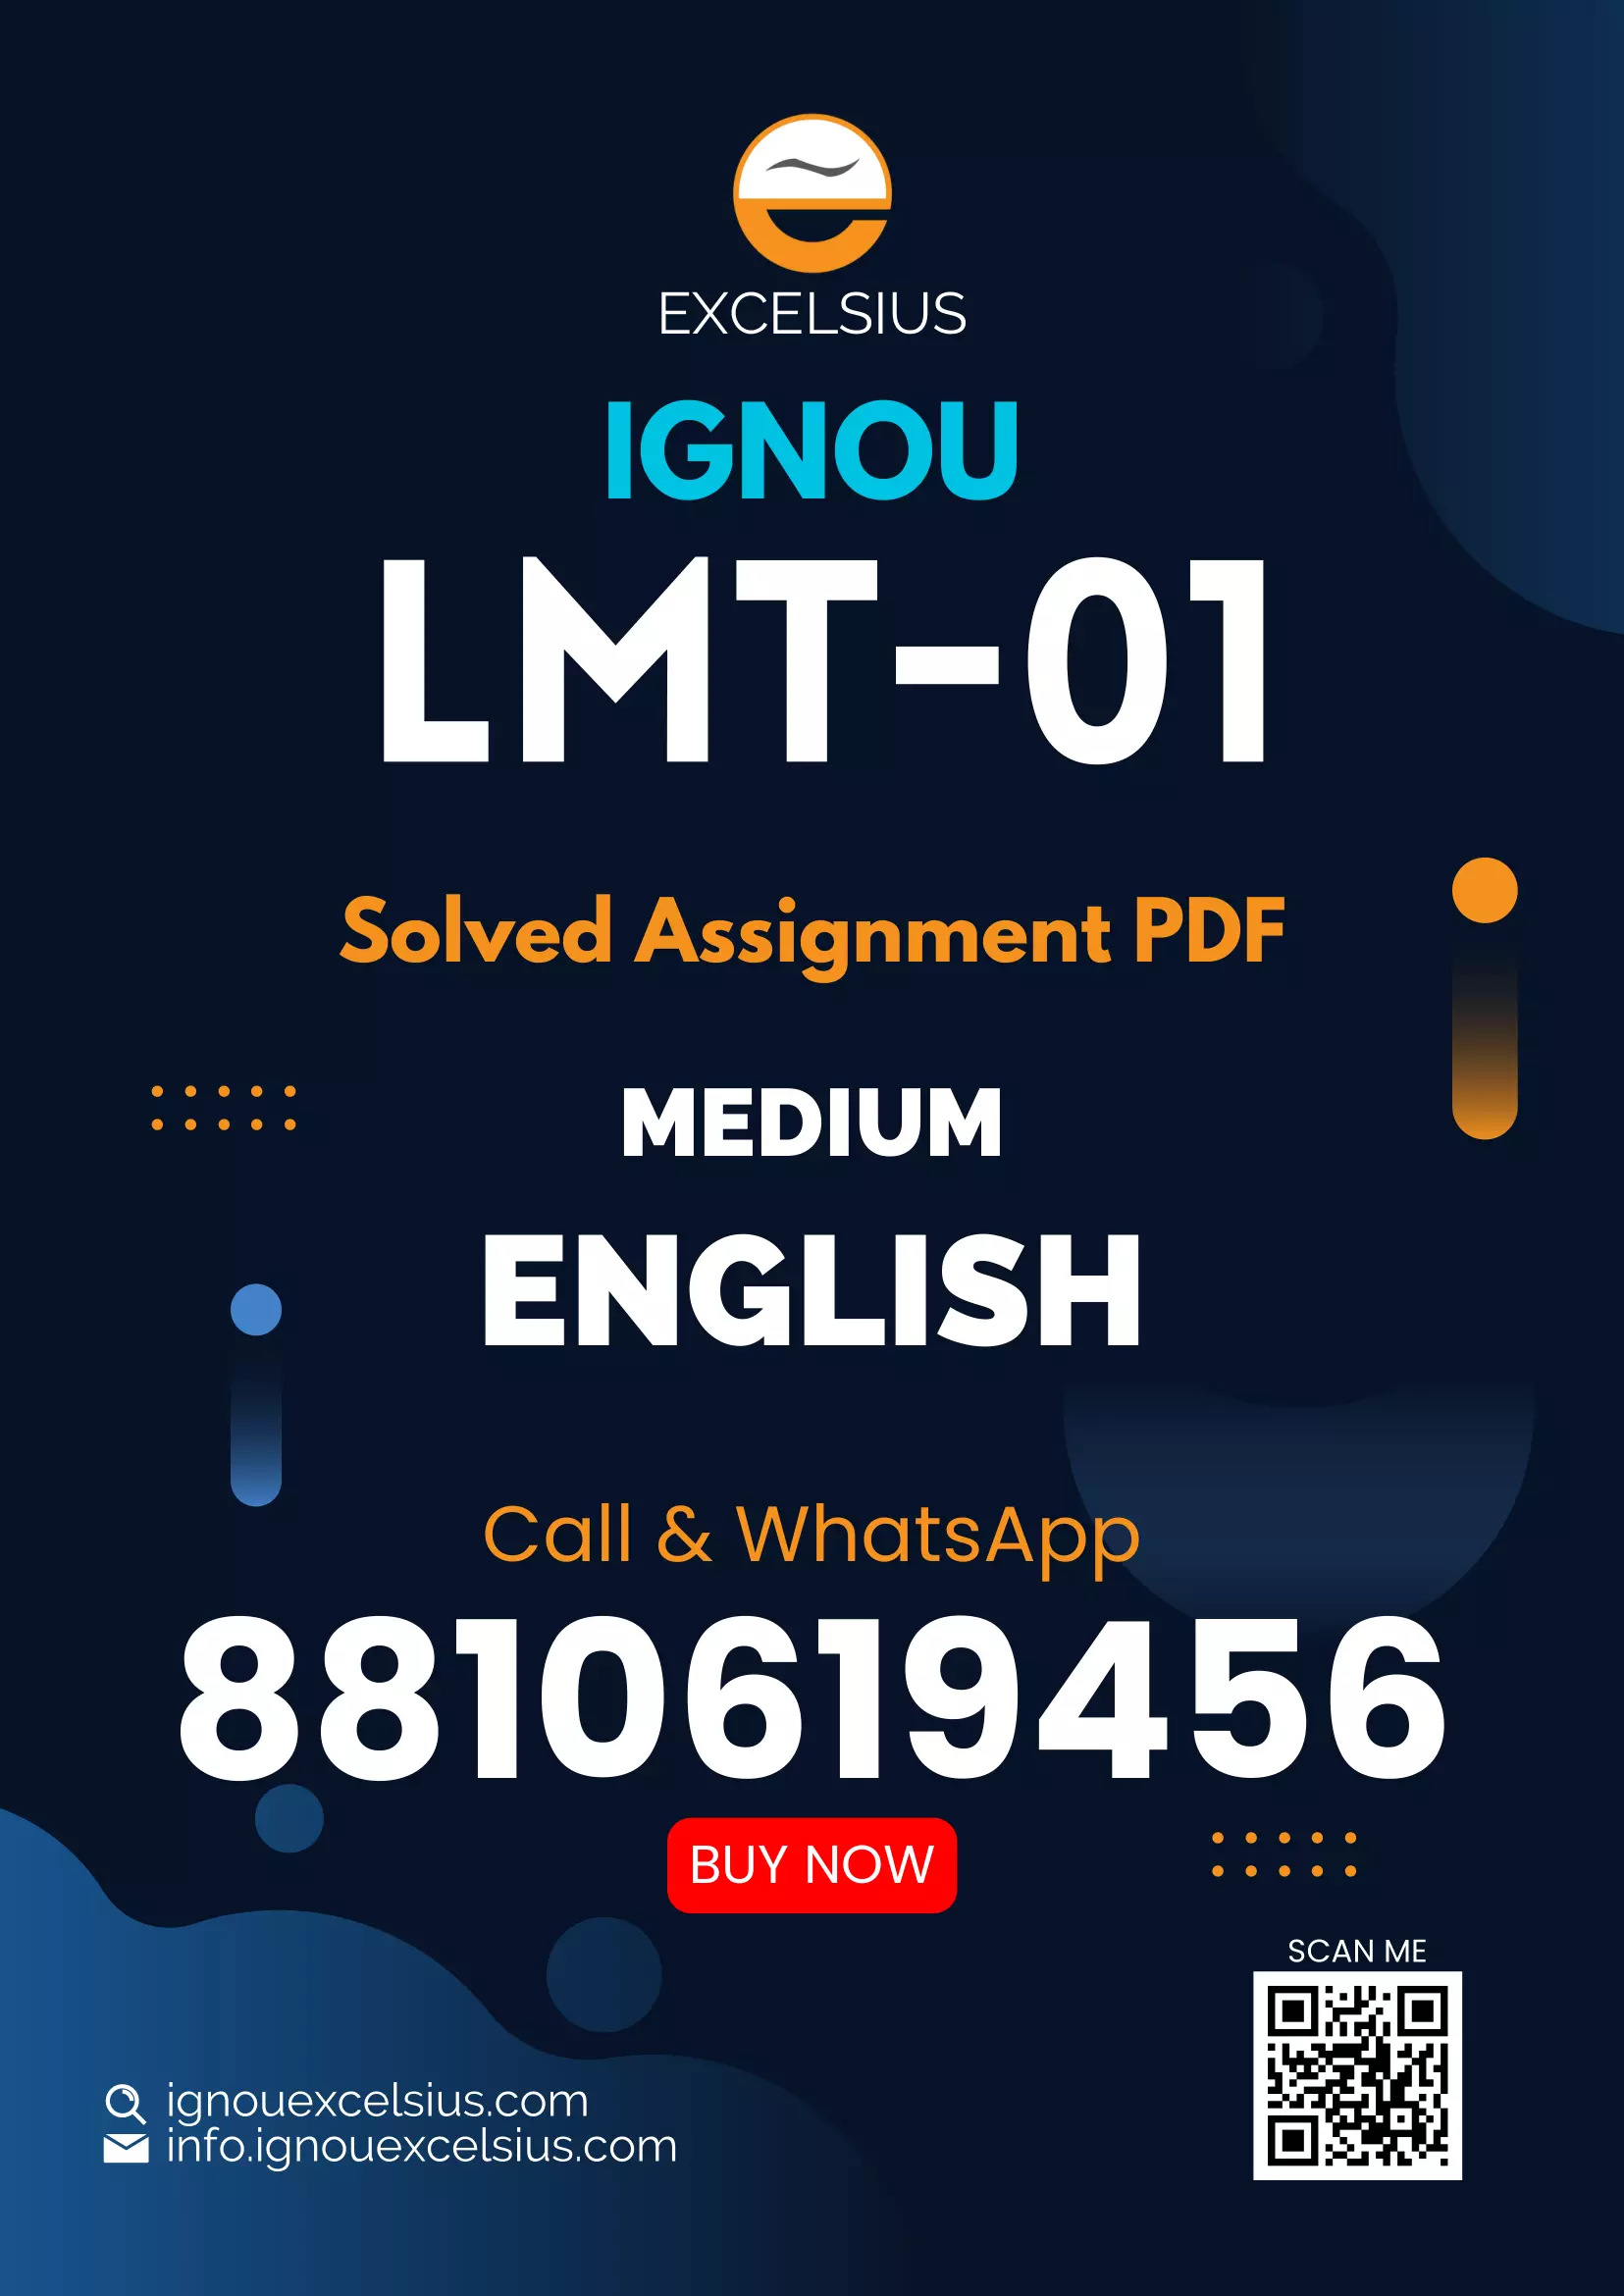 IGNOU LMT-01 - Learning Mathematics Latest Solved Assignment -July 2022 – January 2023